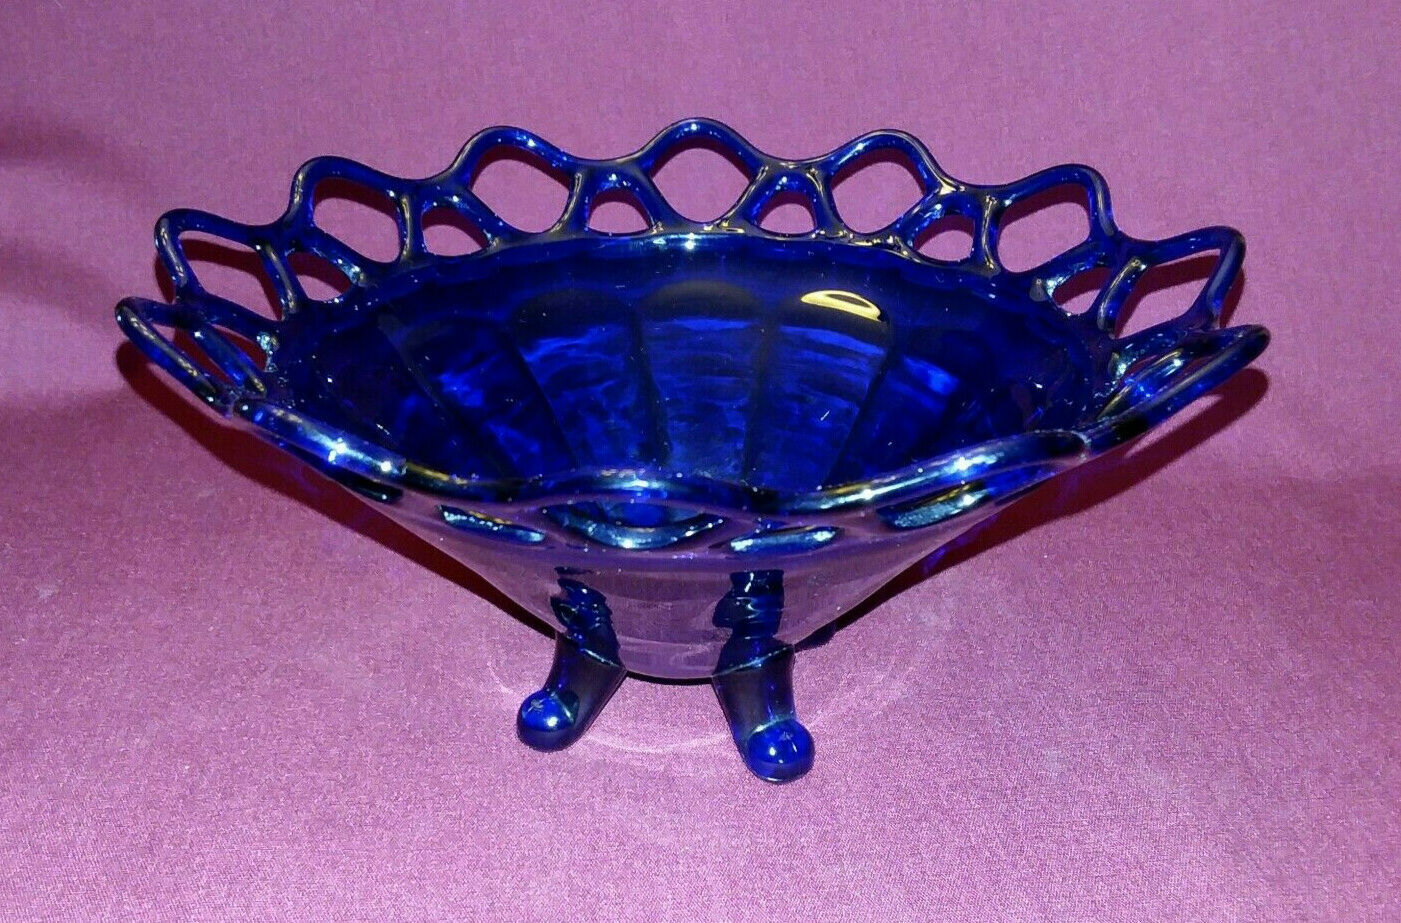 Cobalt Blue Glass 4-toed Footed Bowl With Crocheted Lace Around Rim At Top